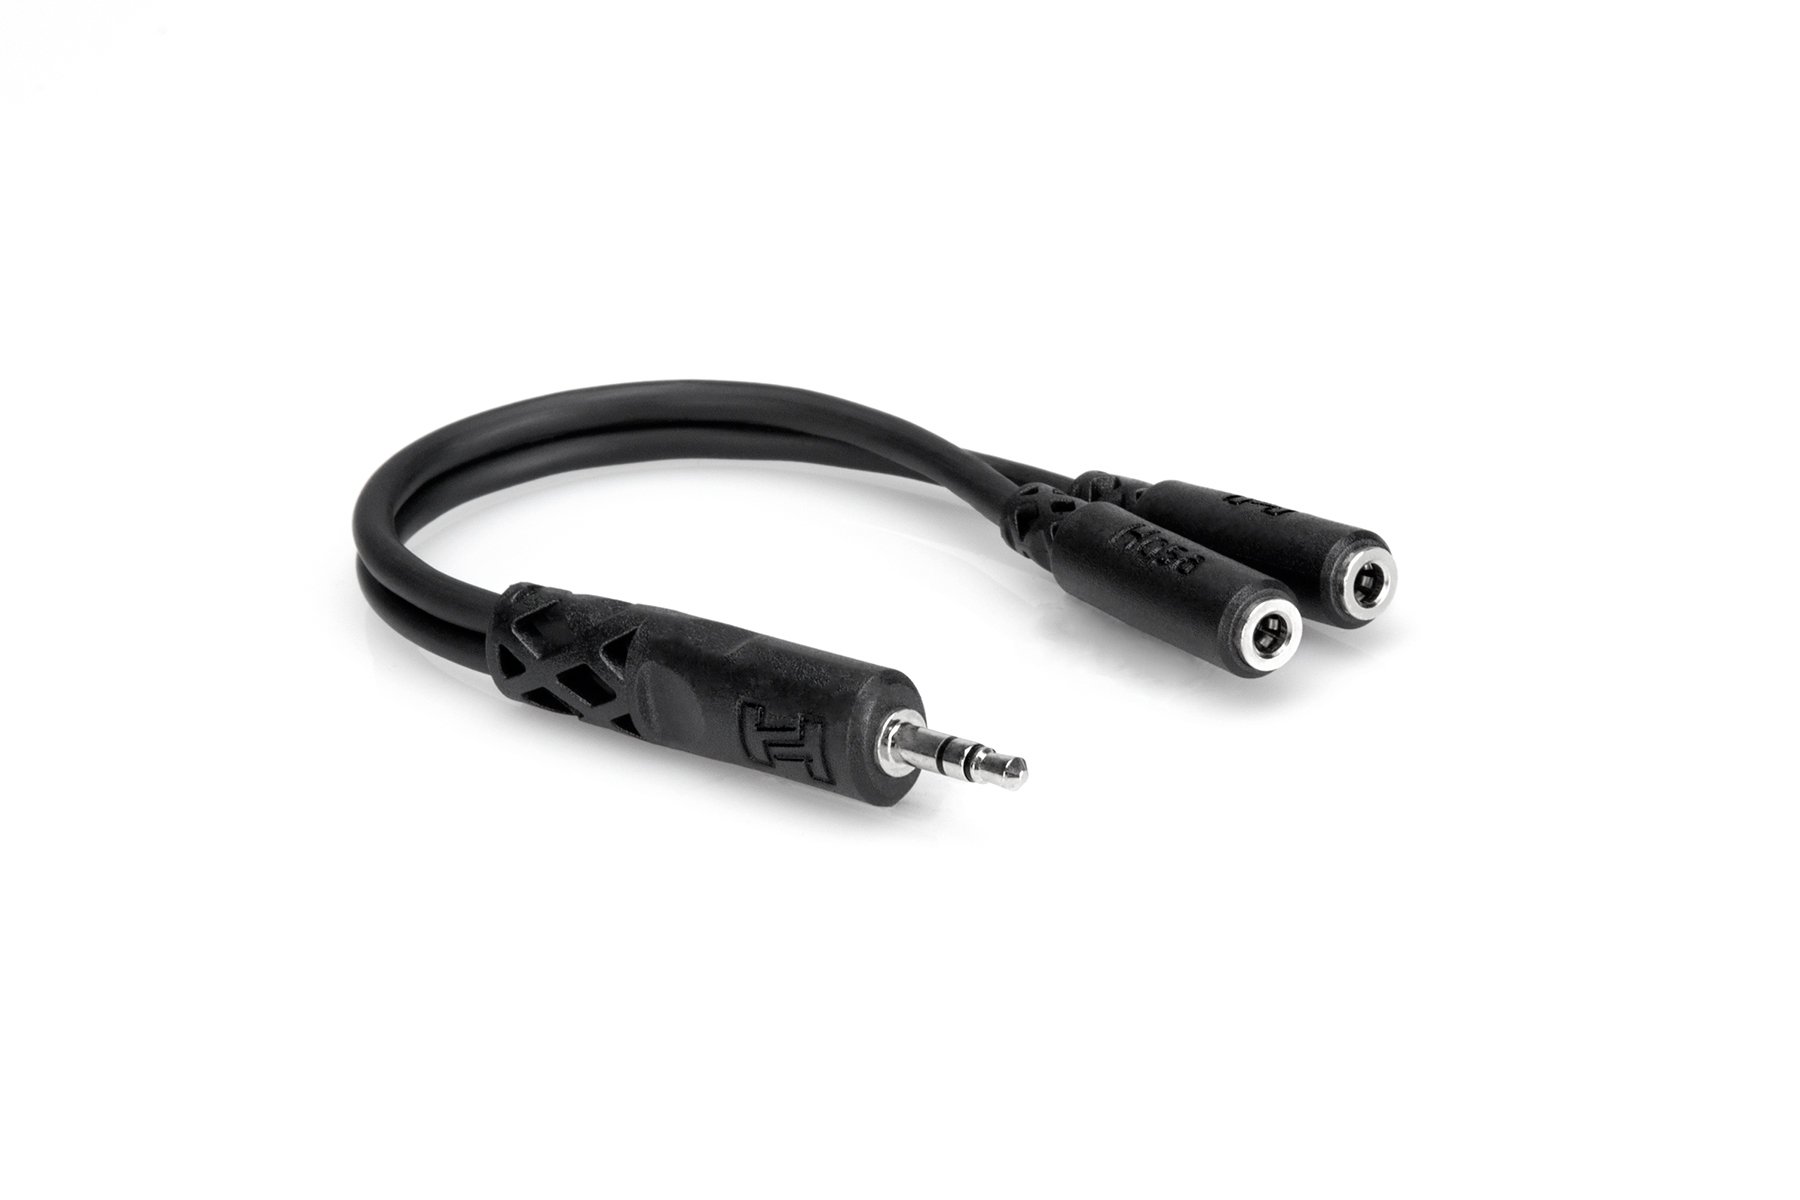 Photos - Cable (video, audio, USB) Hosa YMM-232 6 3.5mm TRS to Dual 3.5mm TRSF Headphone Splitter Cable YMM23 